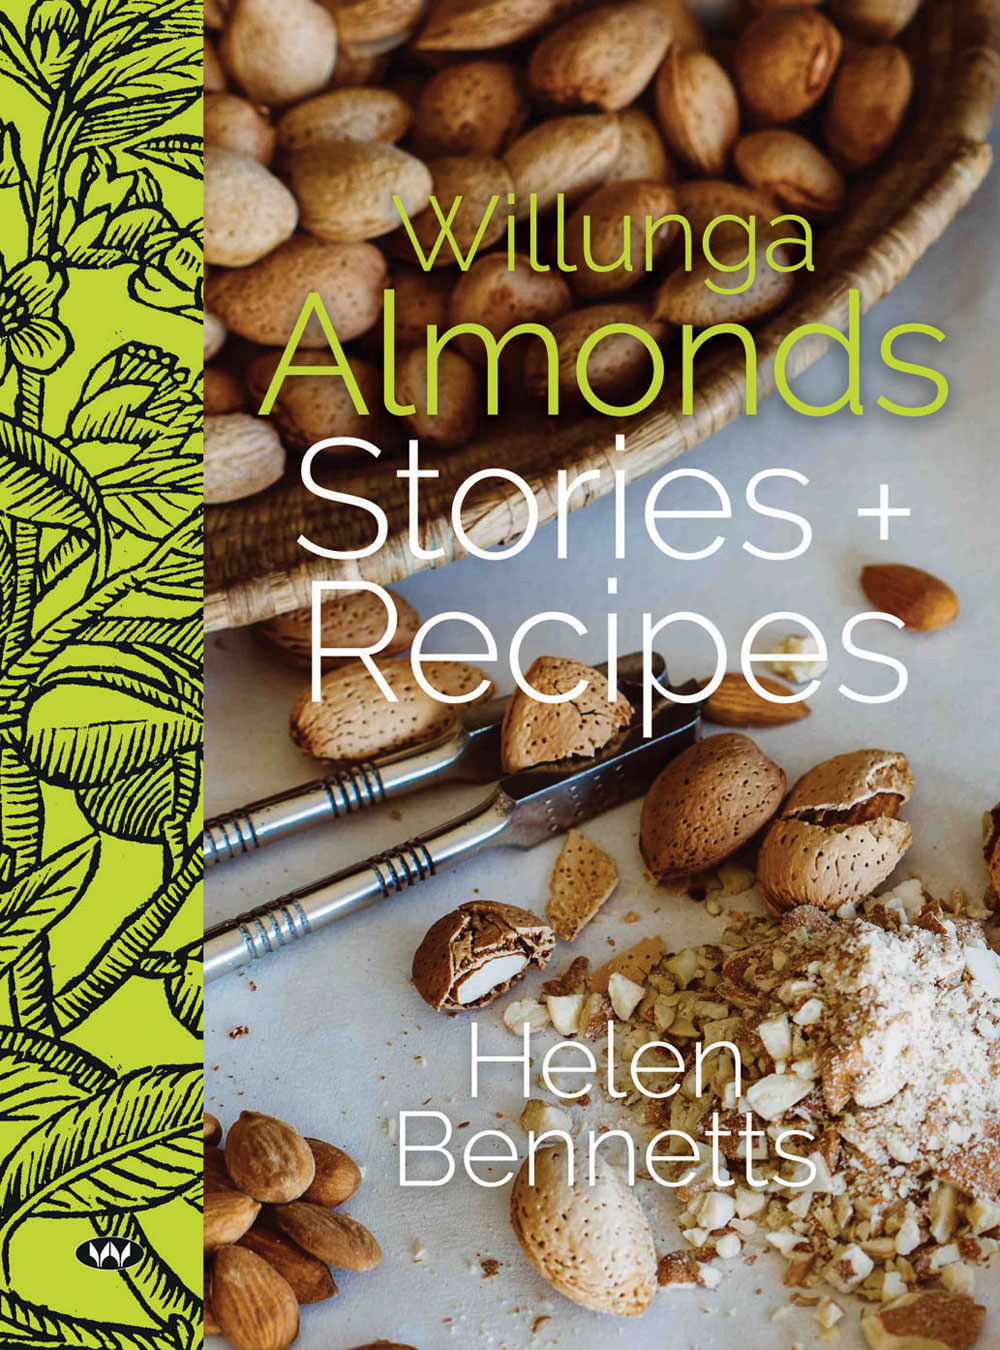 Recipe and image from Willunga Almonds, by Helen Bennetts (Wakefield Press).